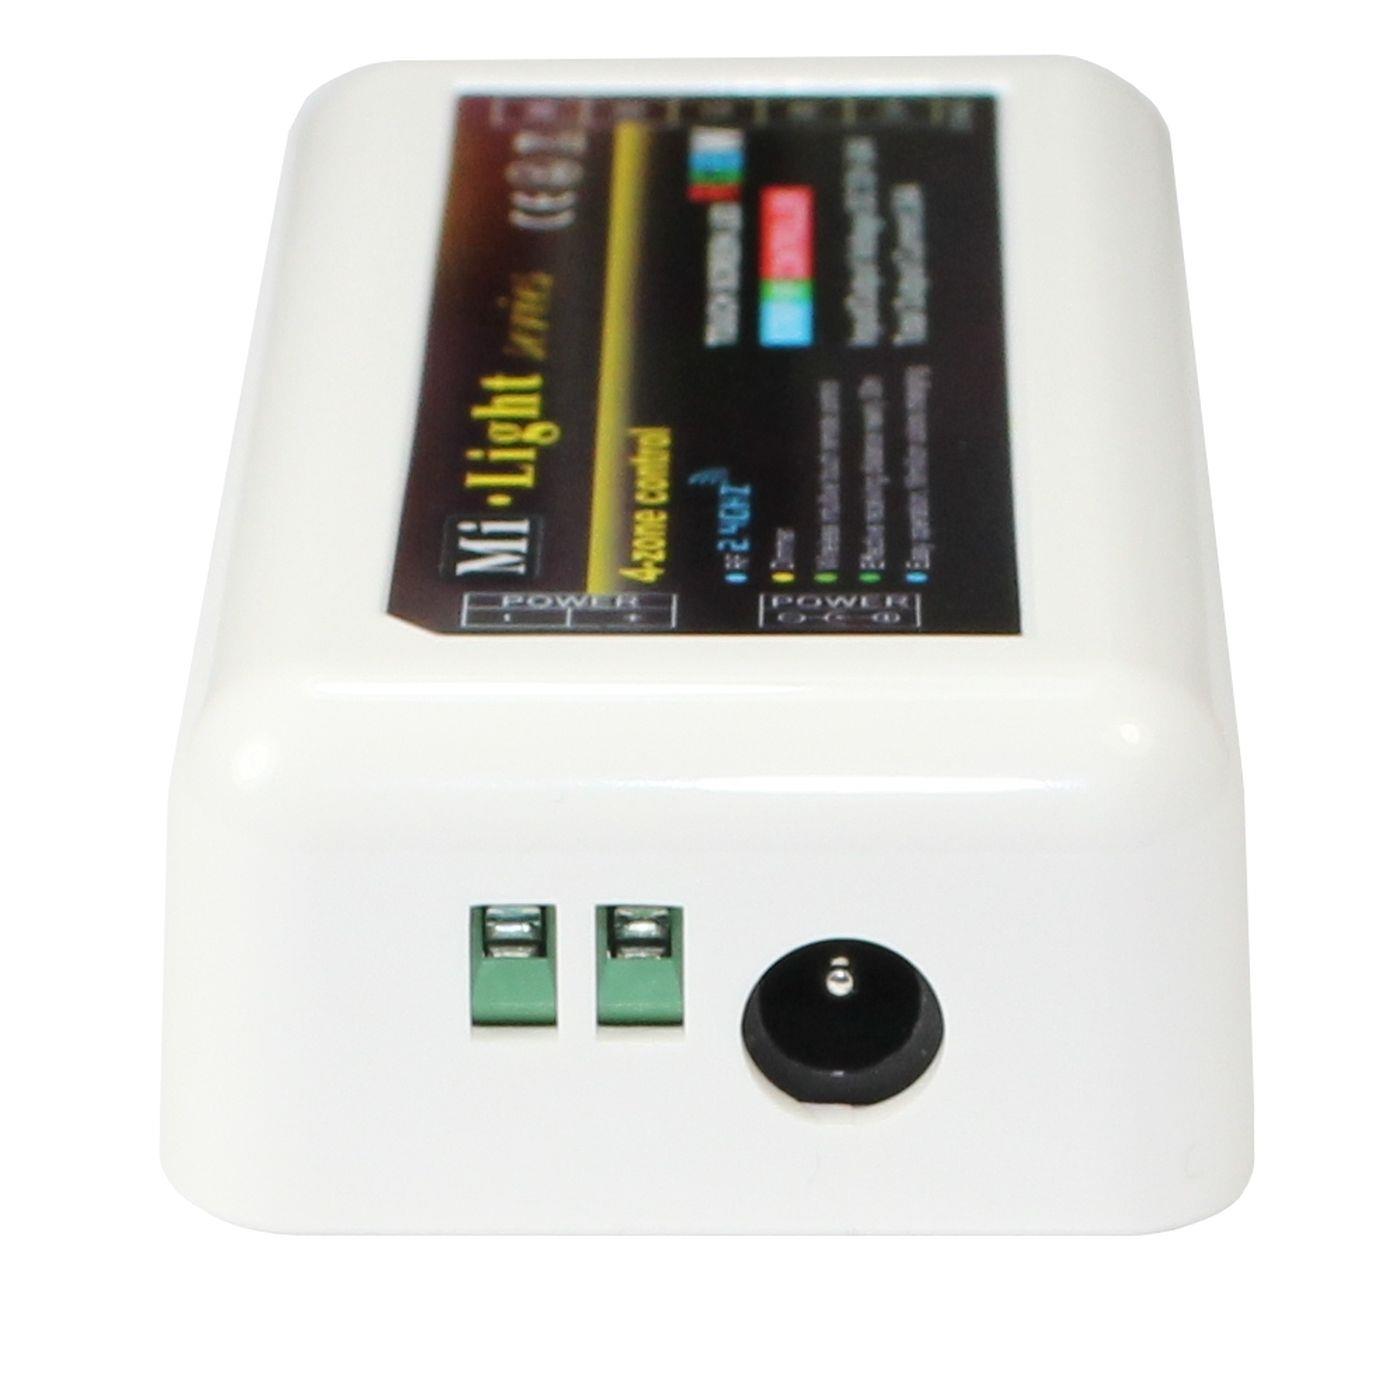 MiLight MiBoxer RGBW LED 4-Zone Receiver 12...24V 240W for colour changing strips 5-Pin